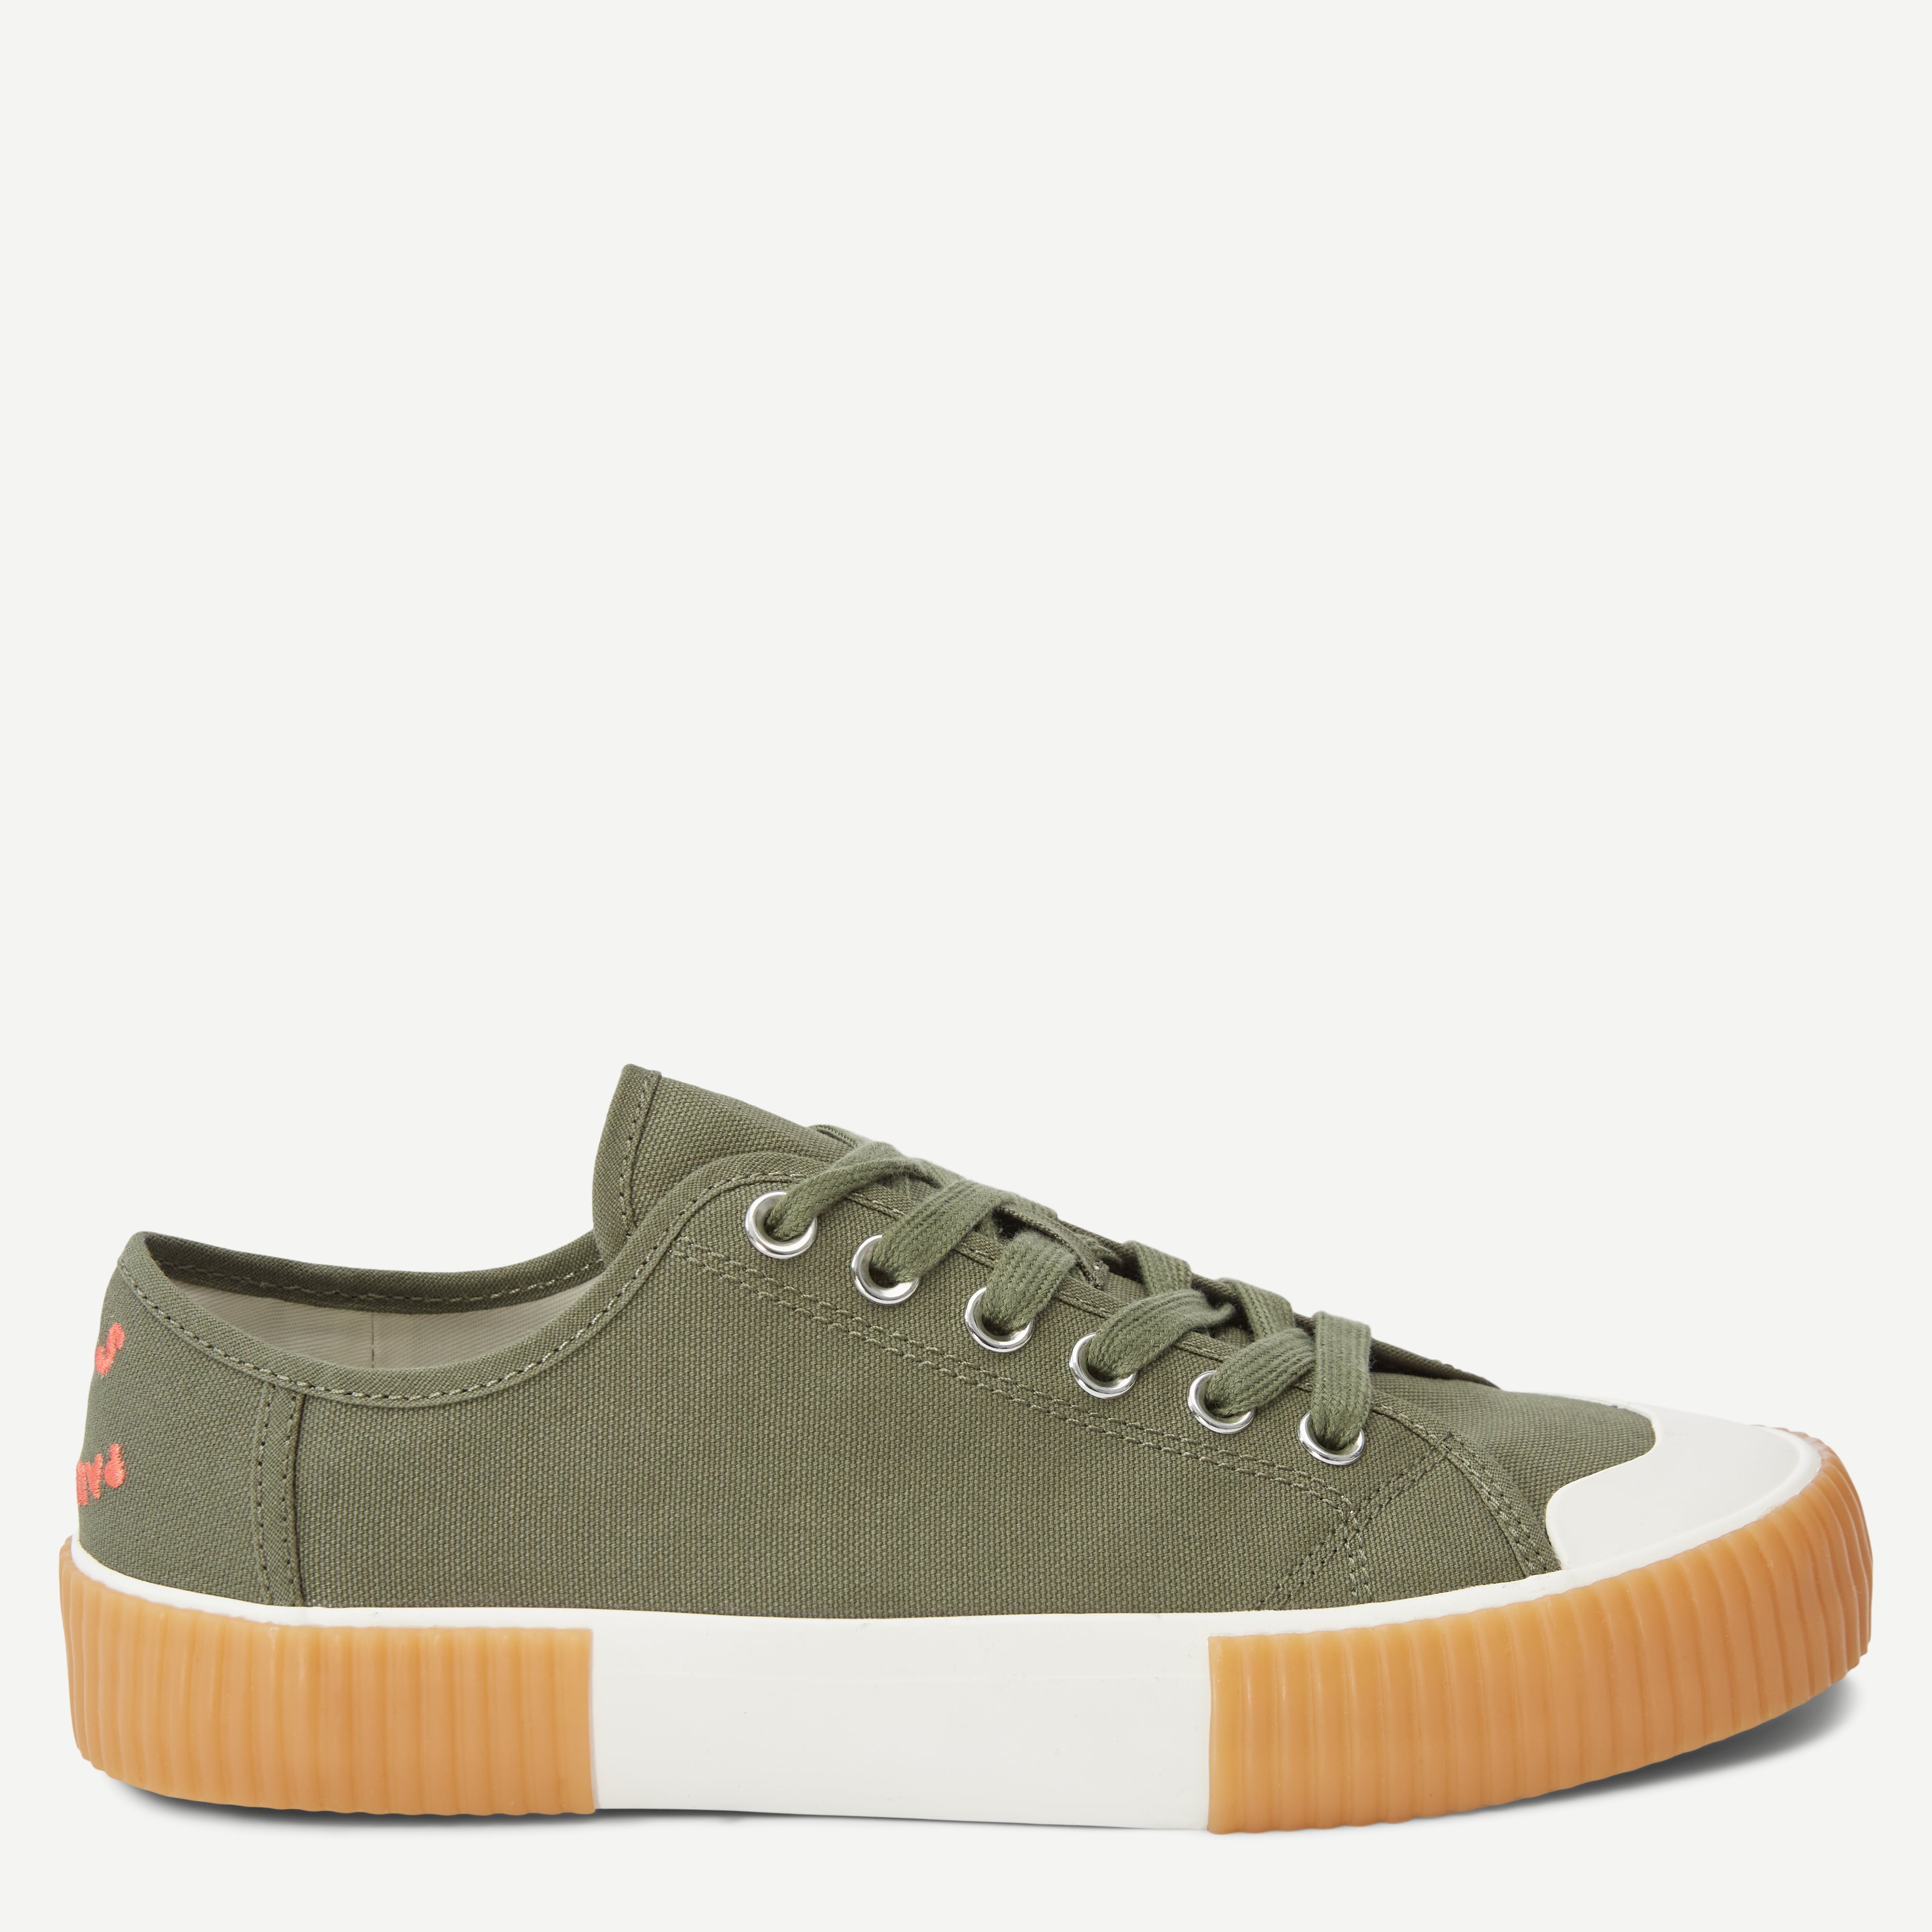 Paul Smith Shoes Shoes ISA05-JCVS Green